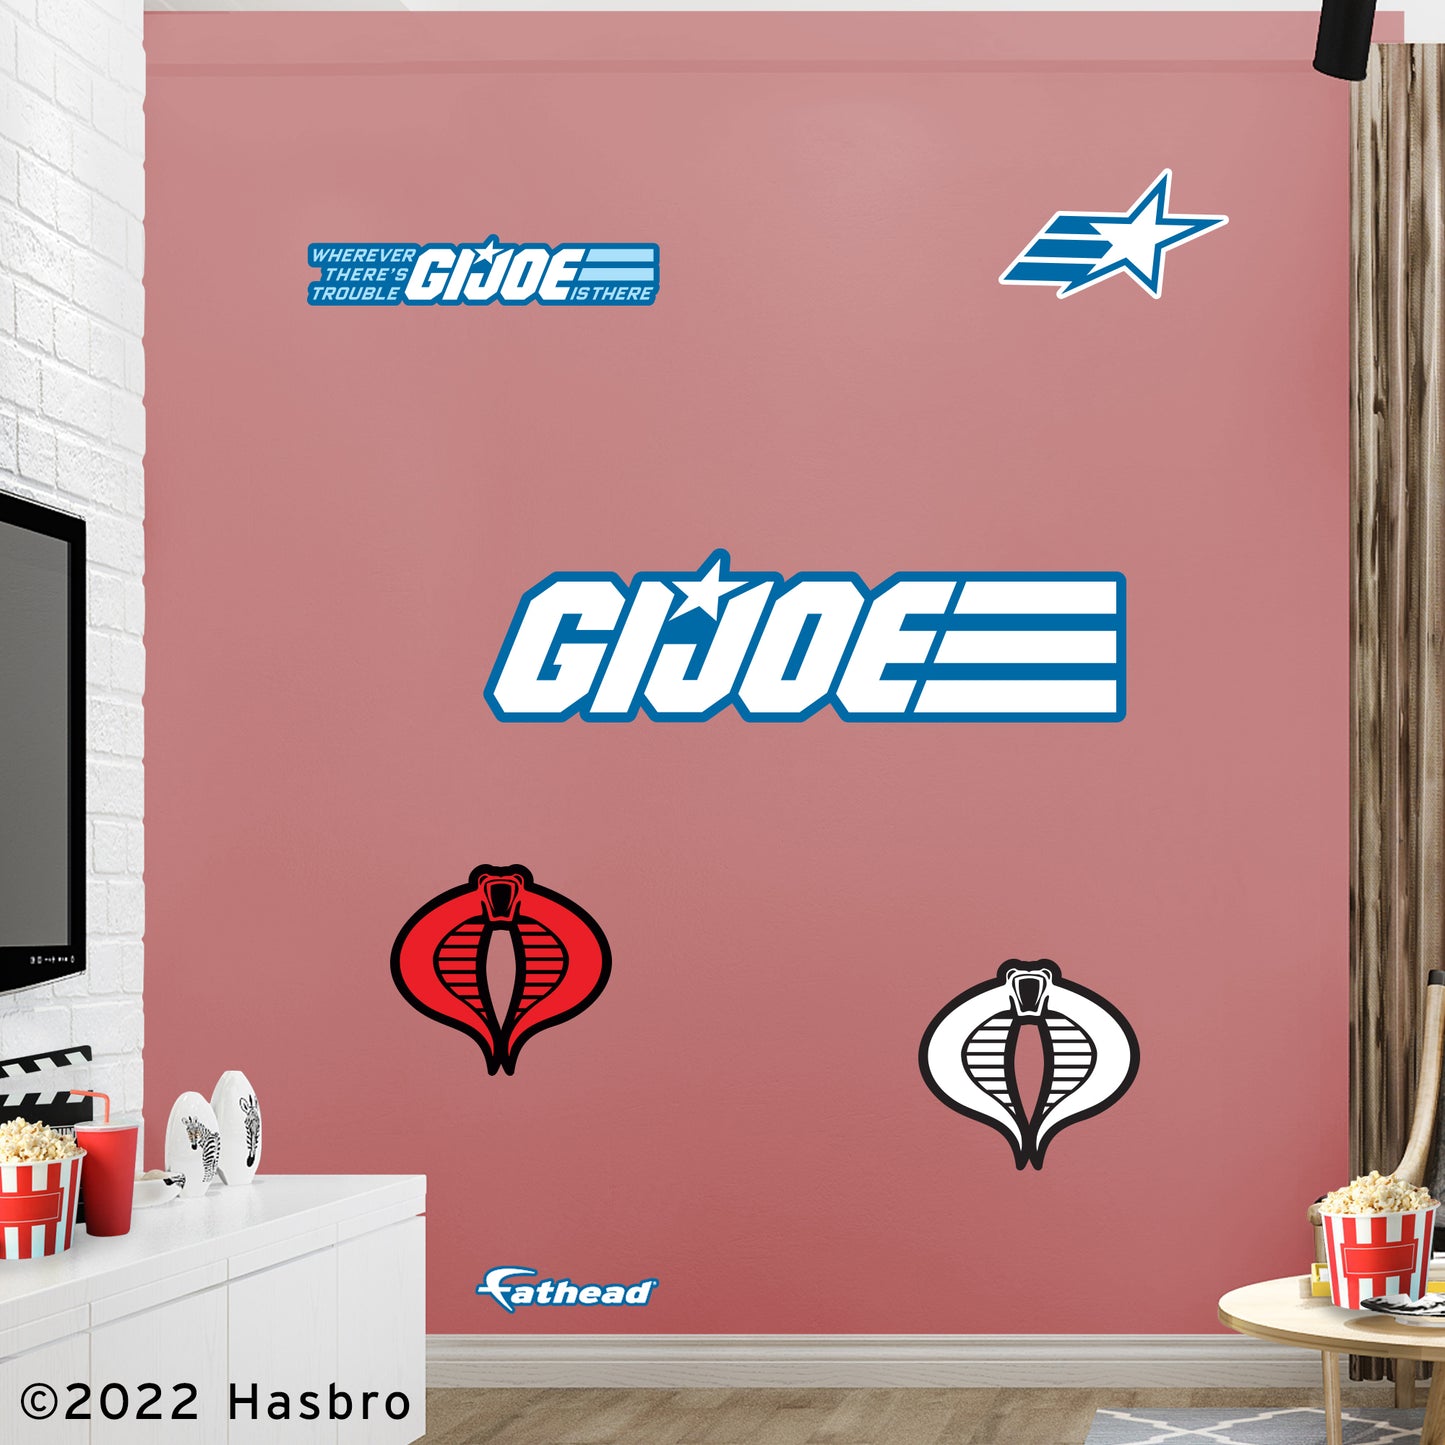 G.I. Joe: Logos - Officially Licensed Hasbro Removable Adhesive Decal